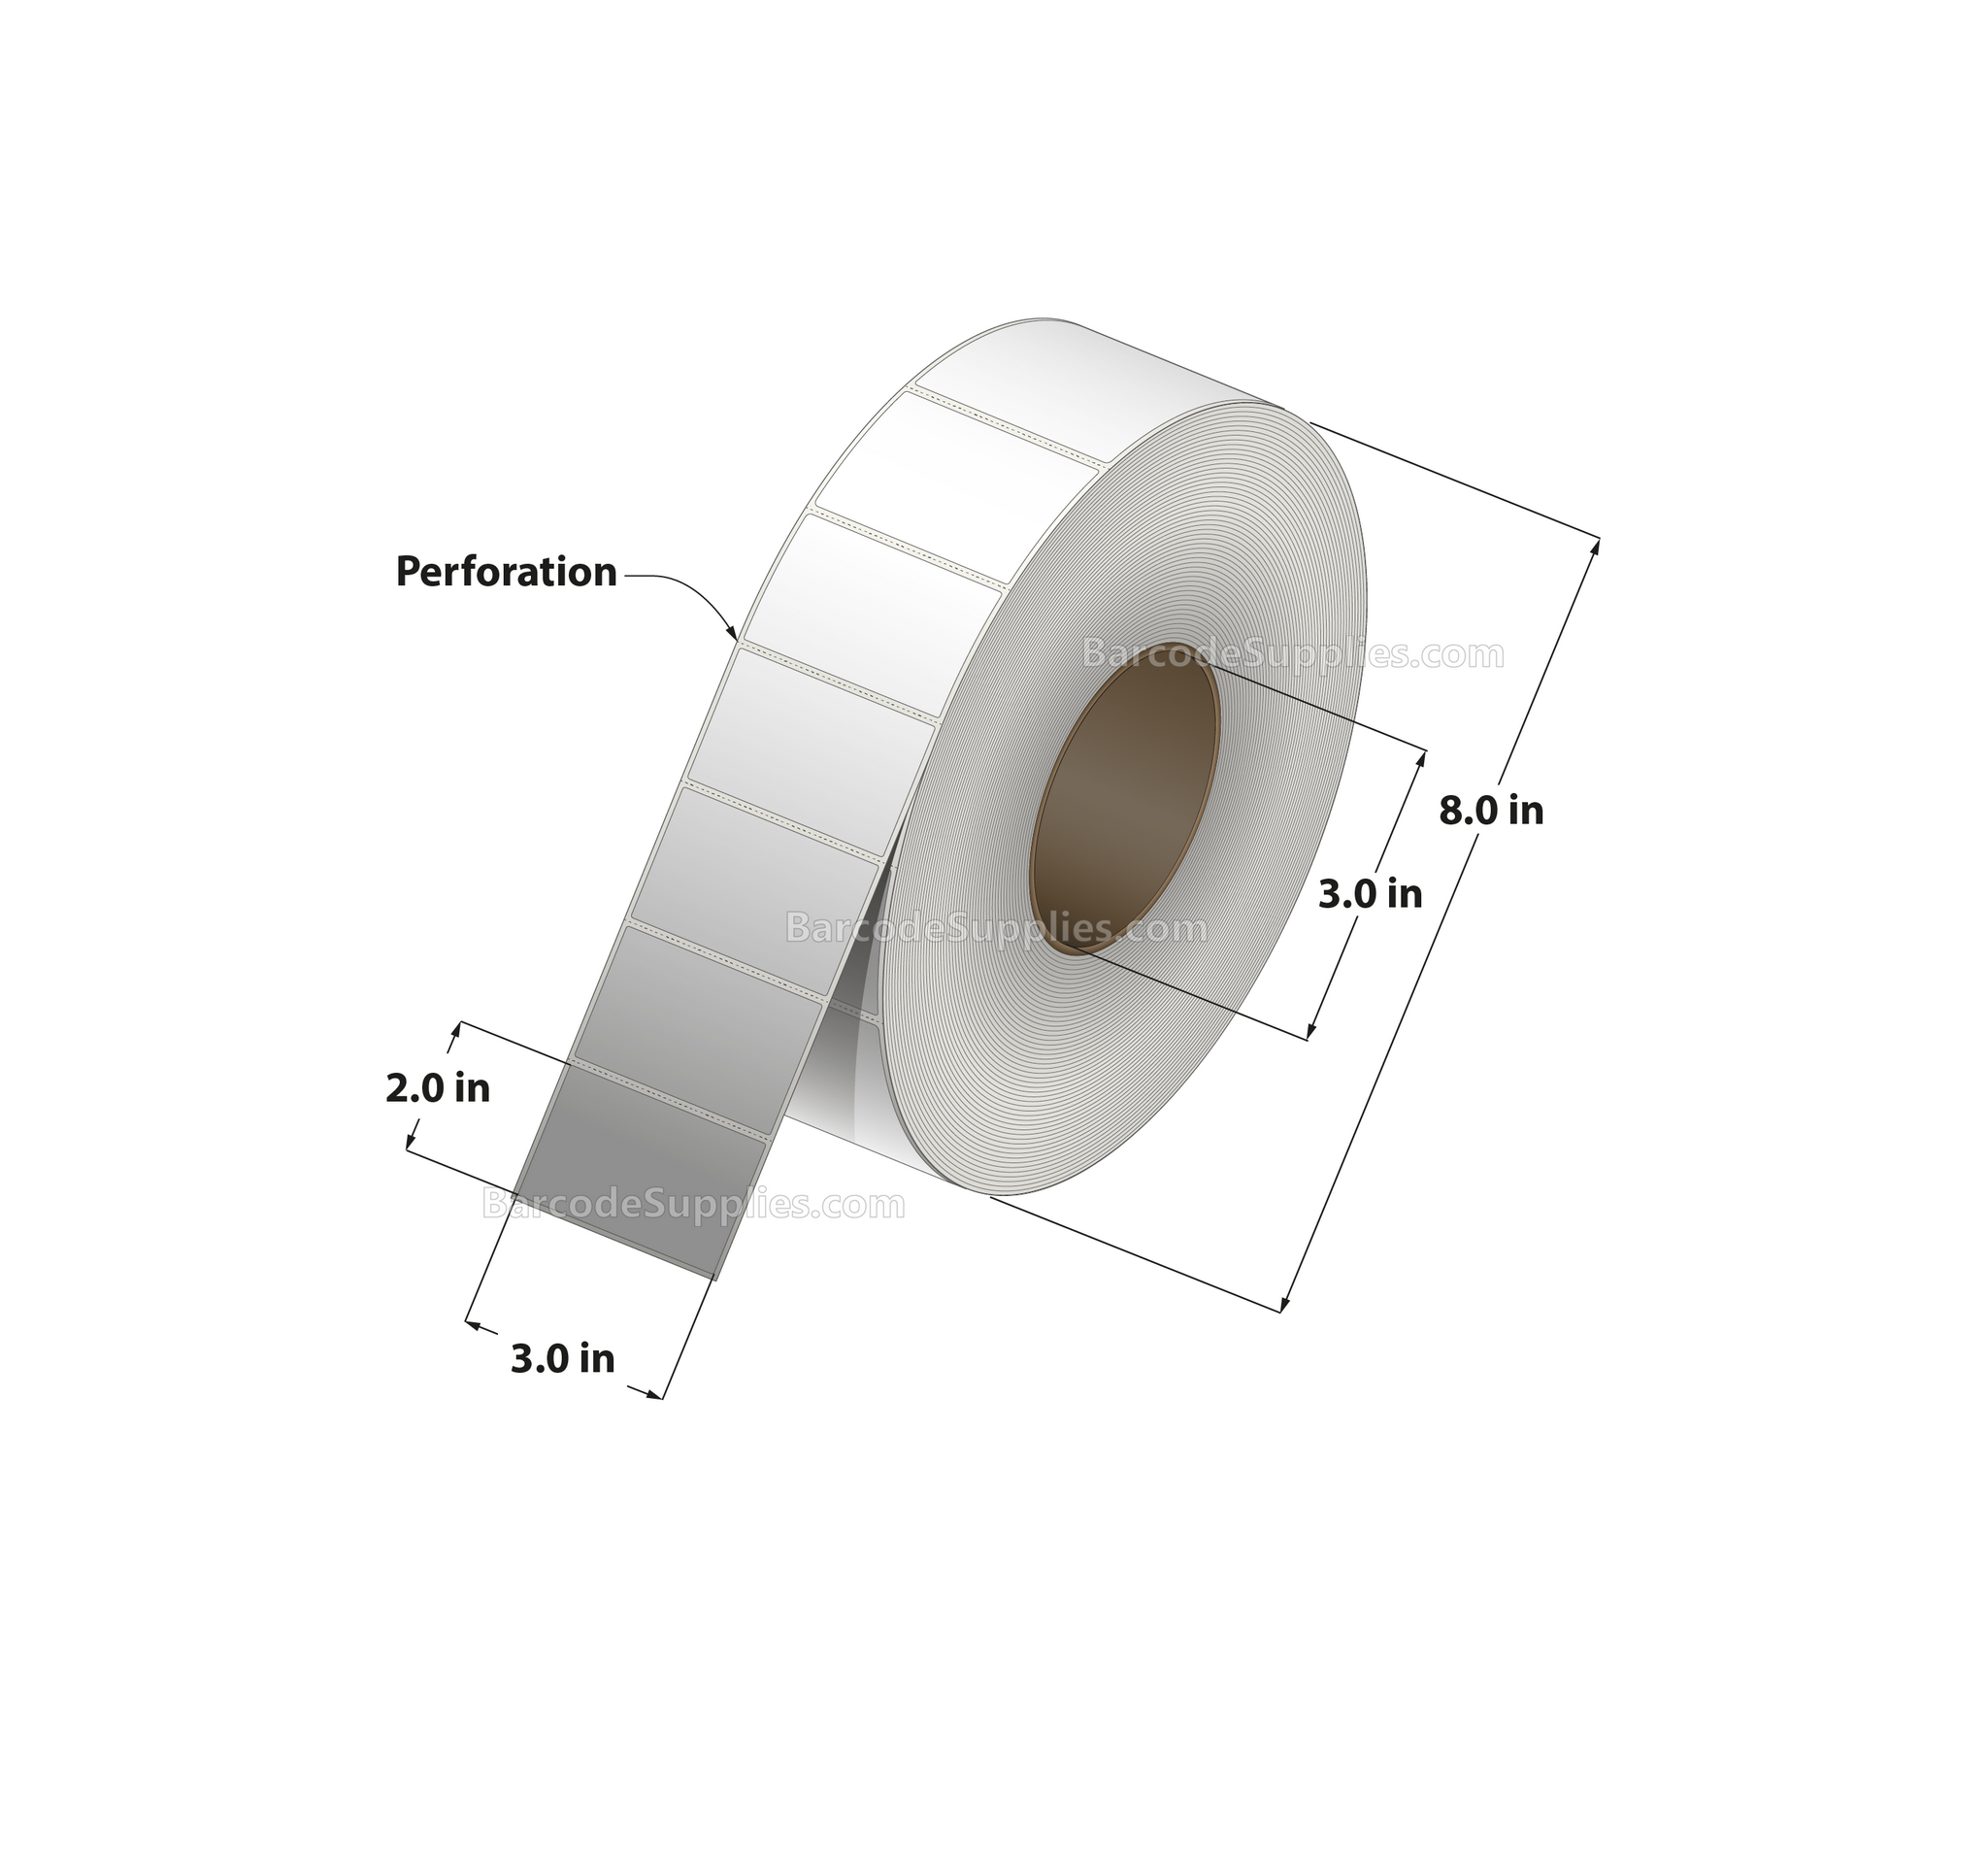 3 x 2 Thermal Transfer White Labels With Permanent Acrylic Adhesive - Perforated - 3000 Labels Per Roll - Carton Of 6 Rolls - 18000 Labels Total - MPN: TH32-1P